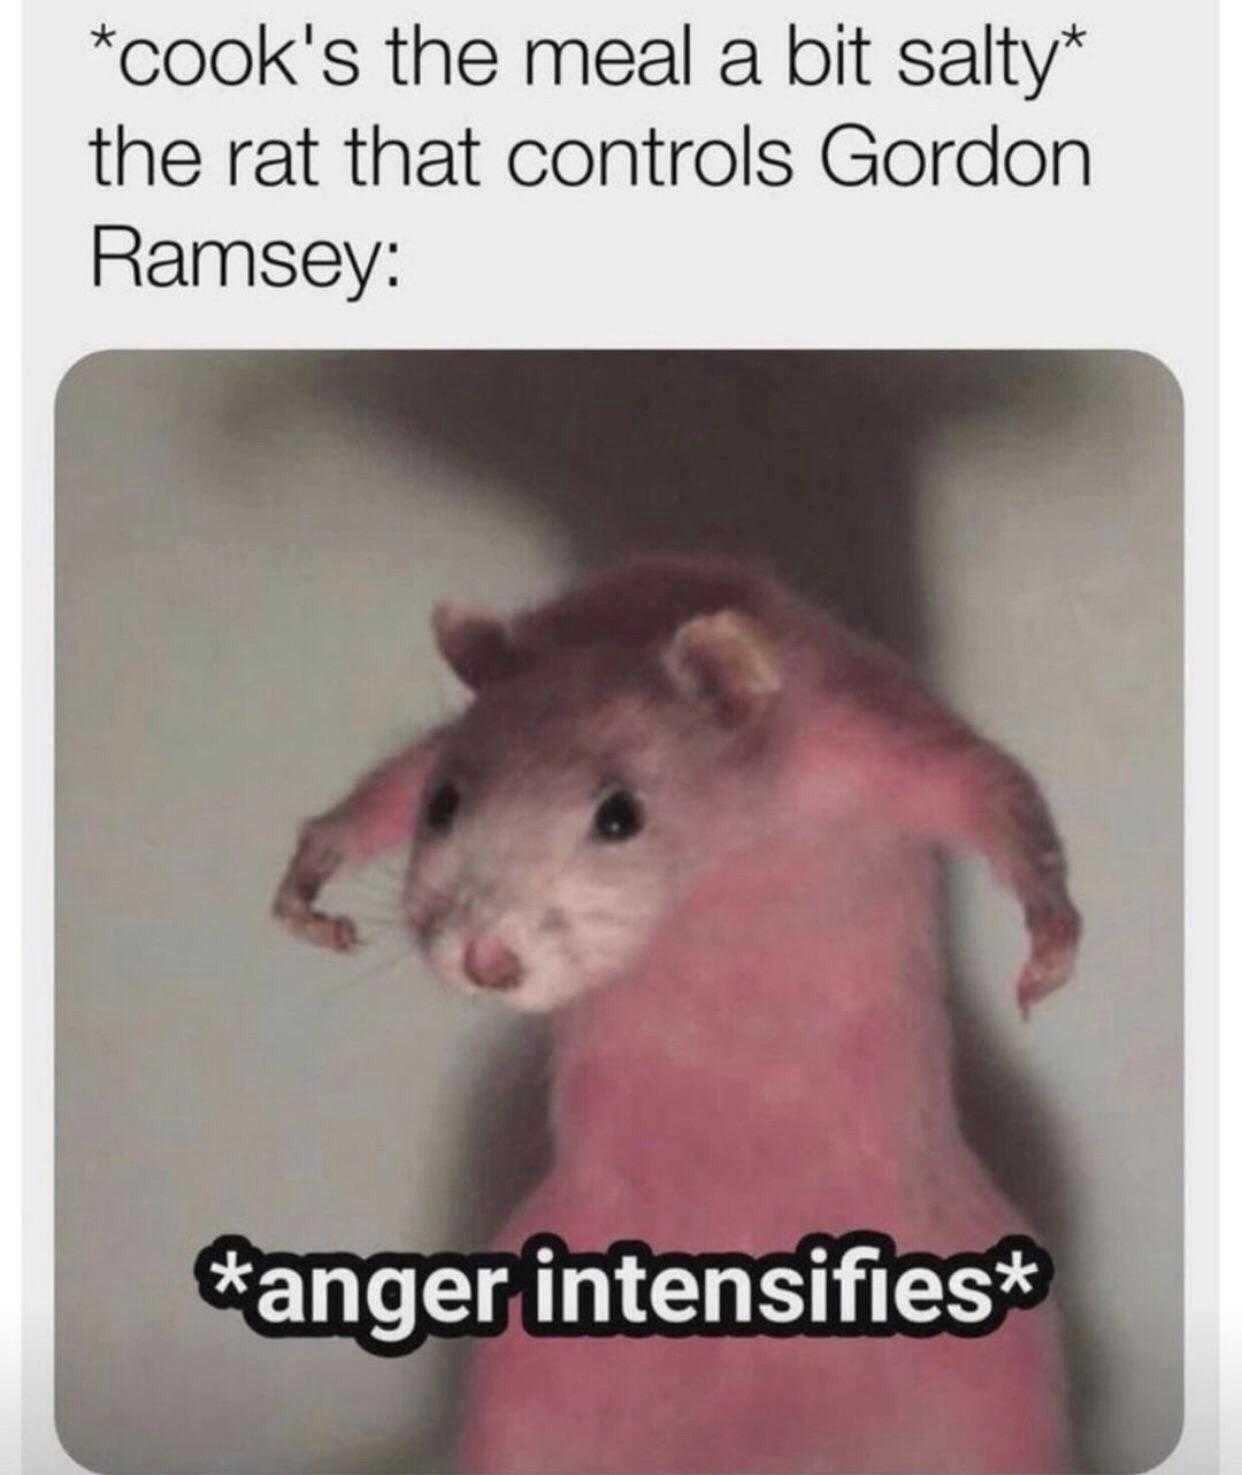 rat - cook's the meal a bit salty the rat that controls Gordon Ramsey anger intensifies